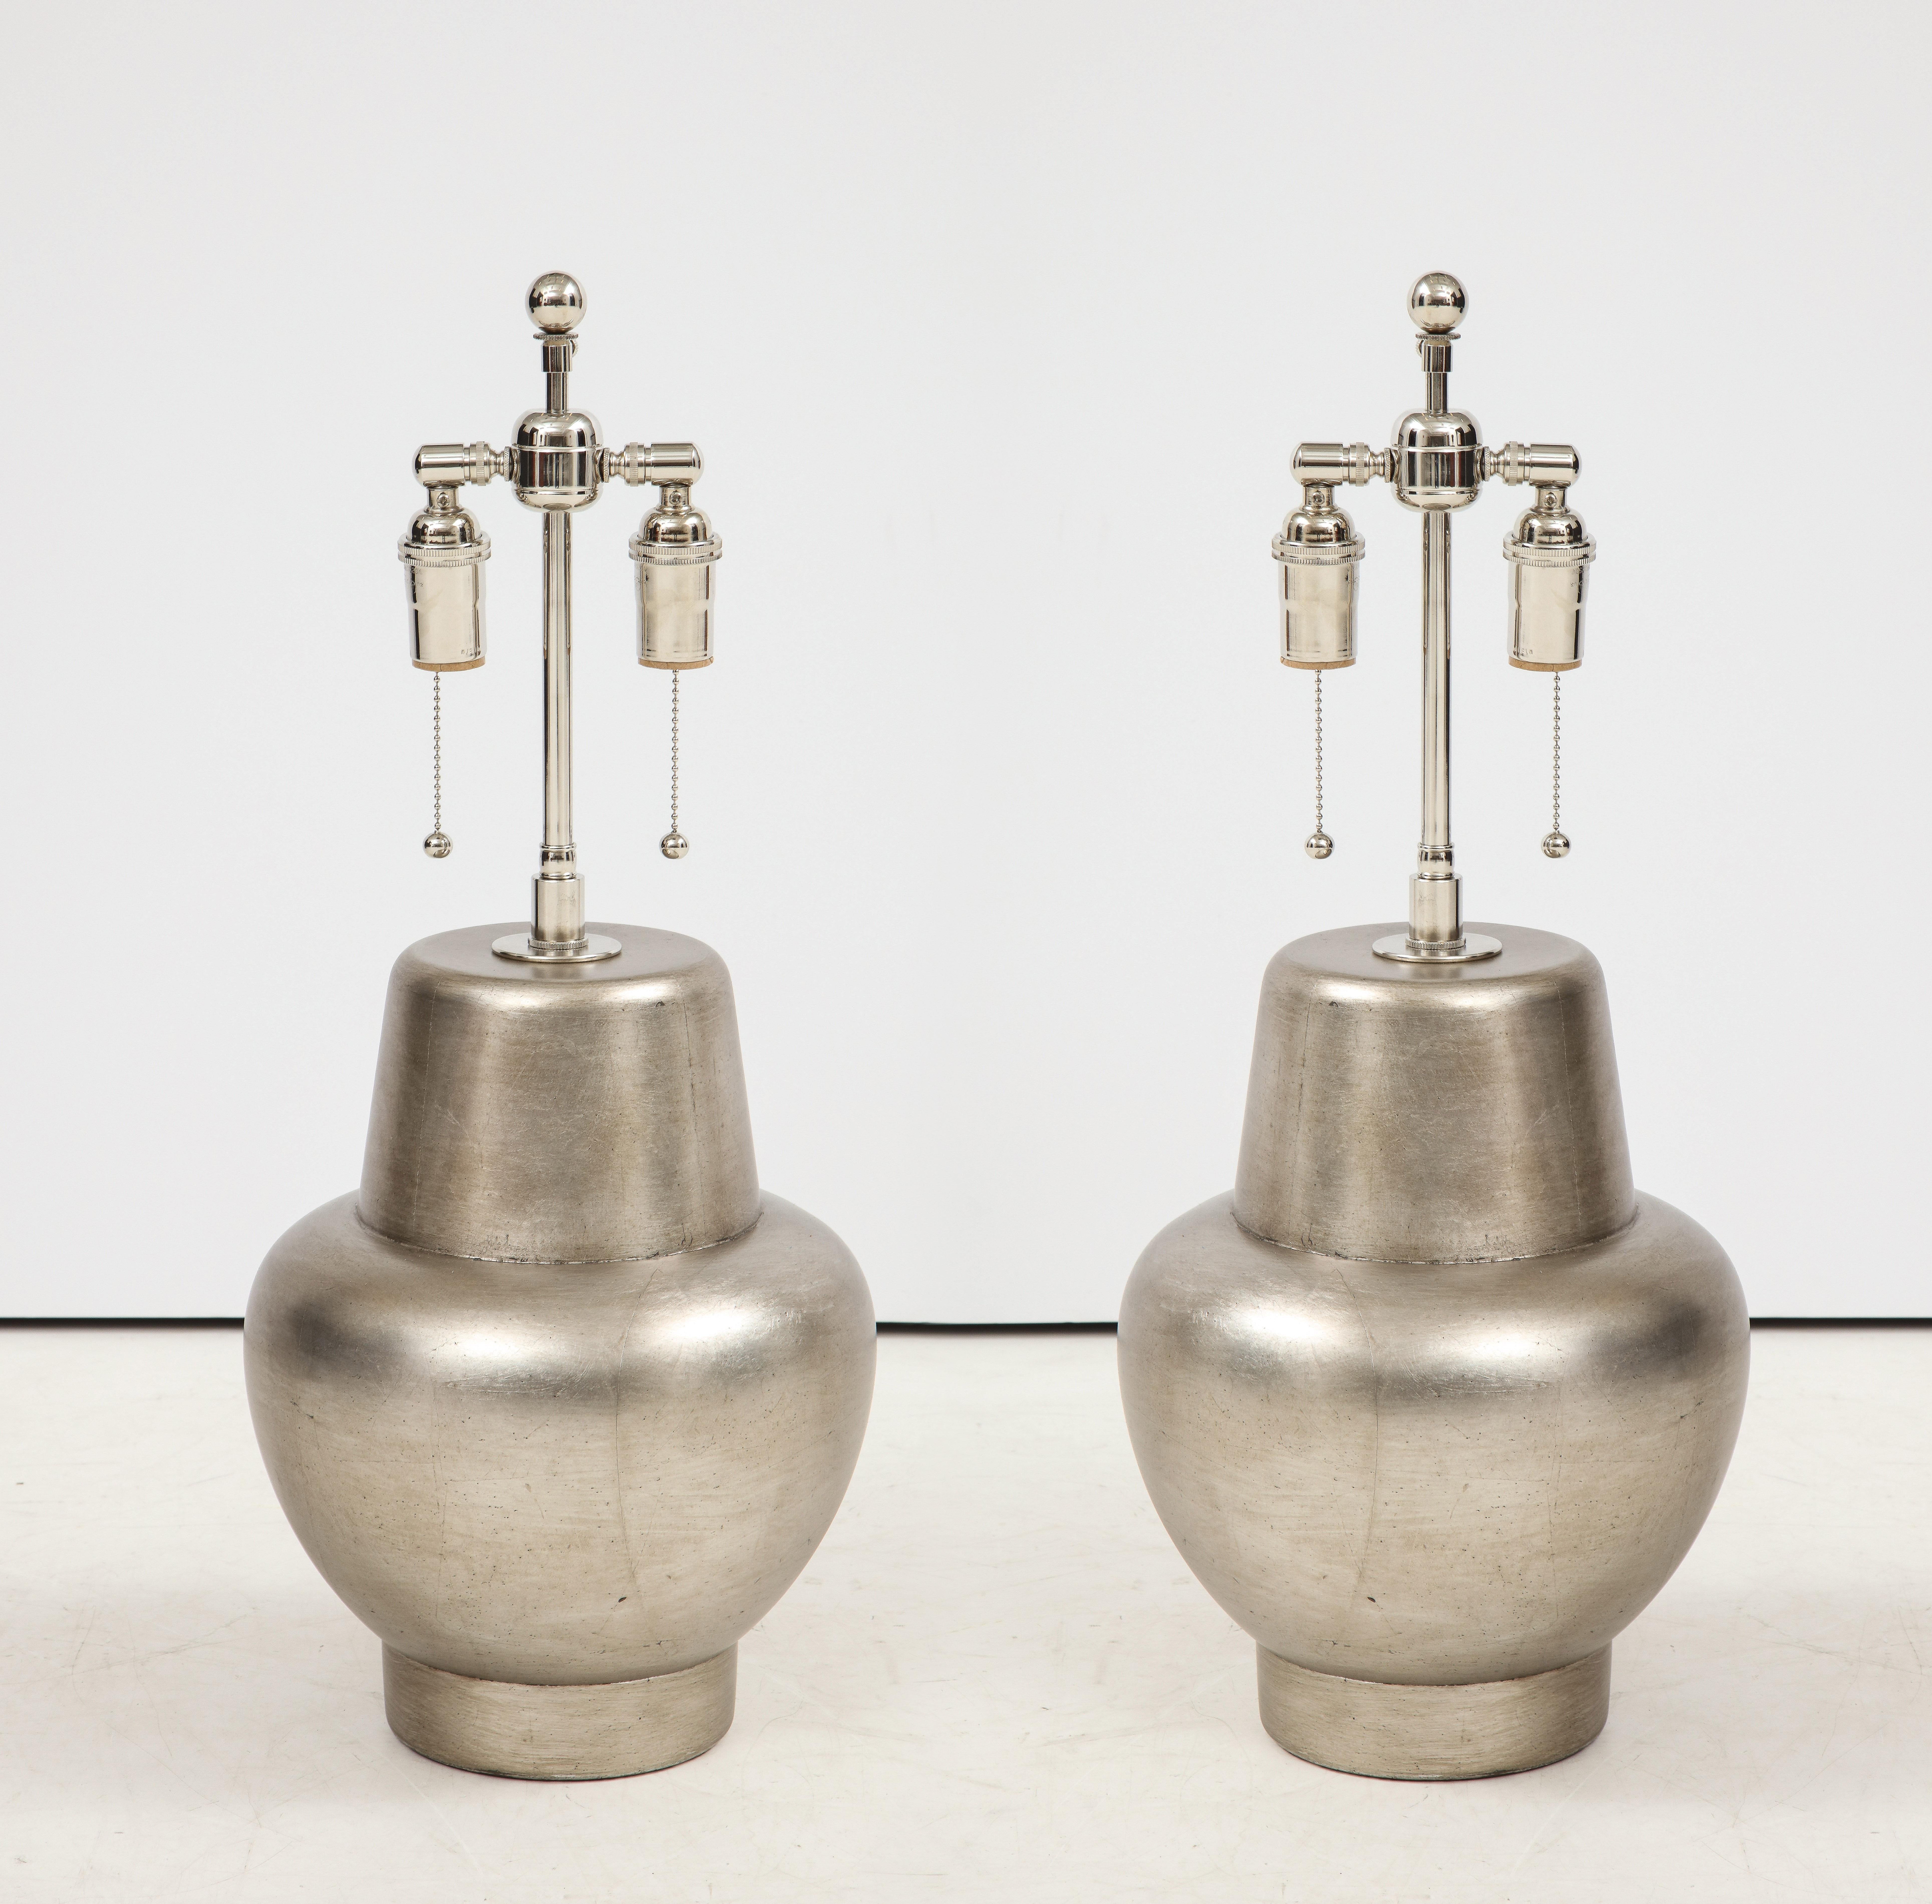 Beautiful pair of glazed silver leafed lamps by James Mont.
The lamps have been newly rewired with polished nickel double clusters.
The price is for the pair
  